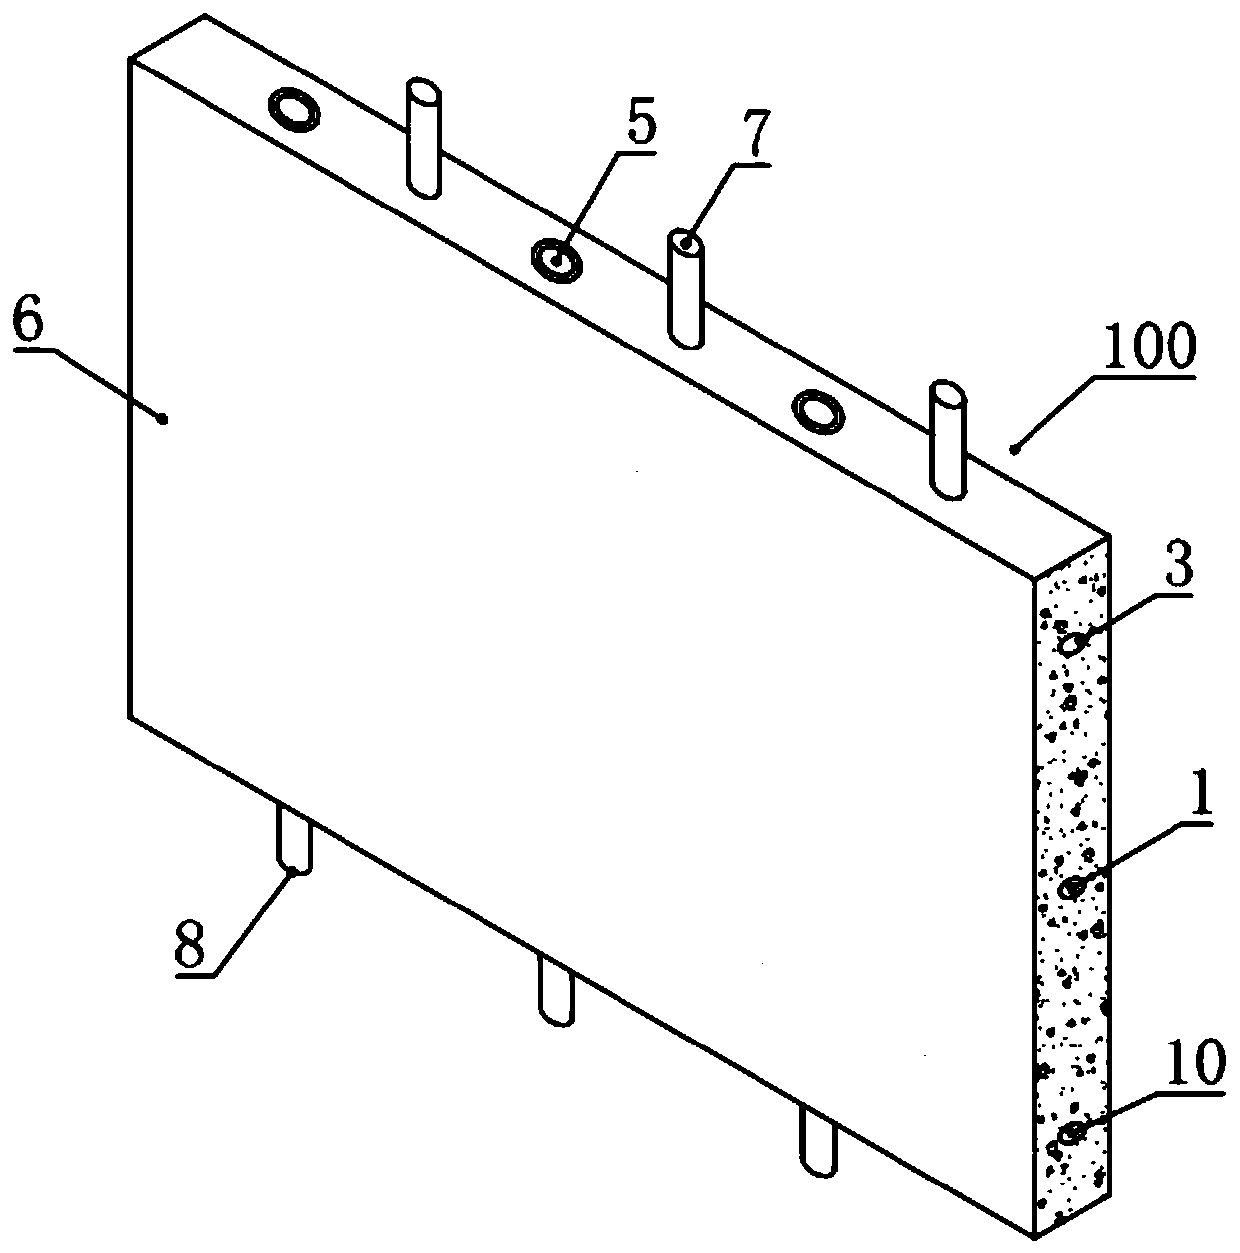 Fabricated shear wall structure vertical connecting structure